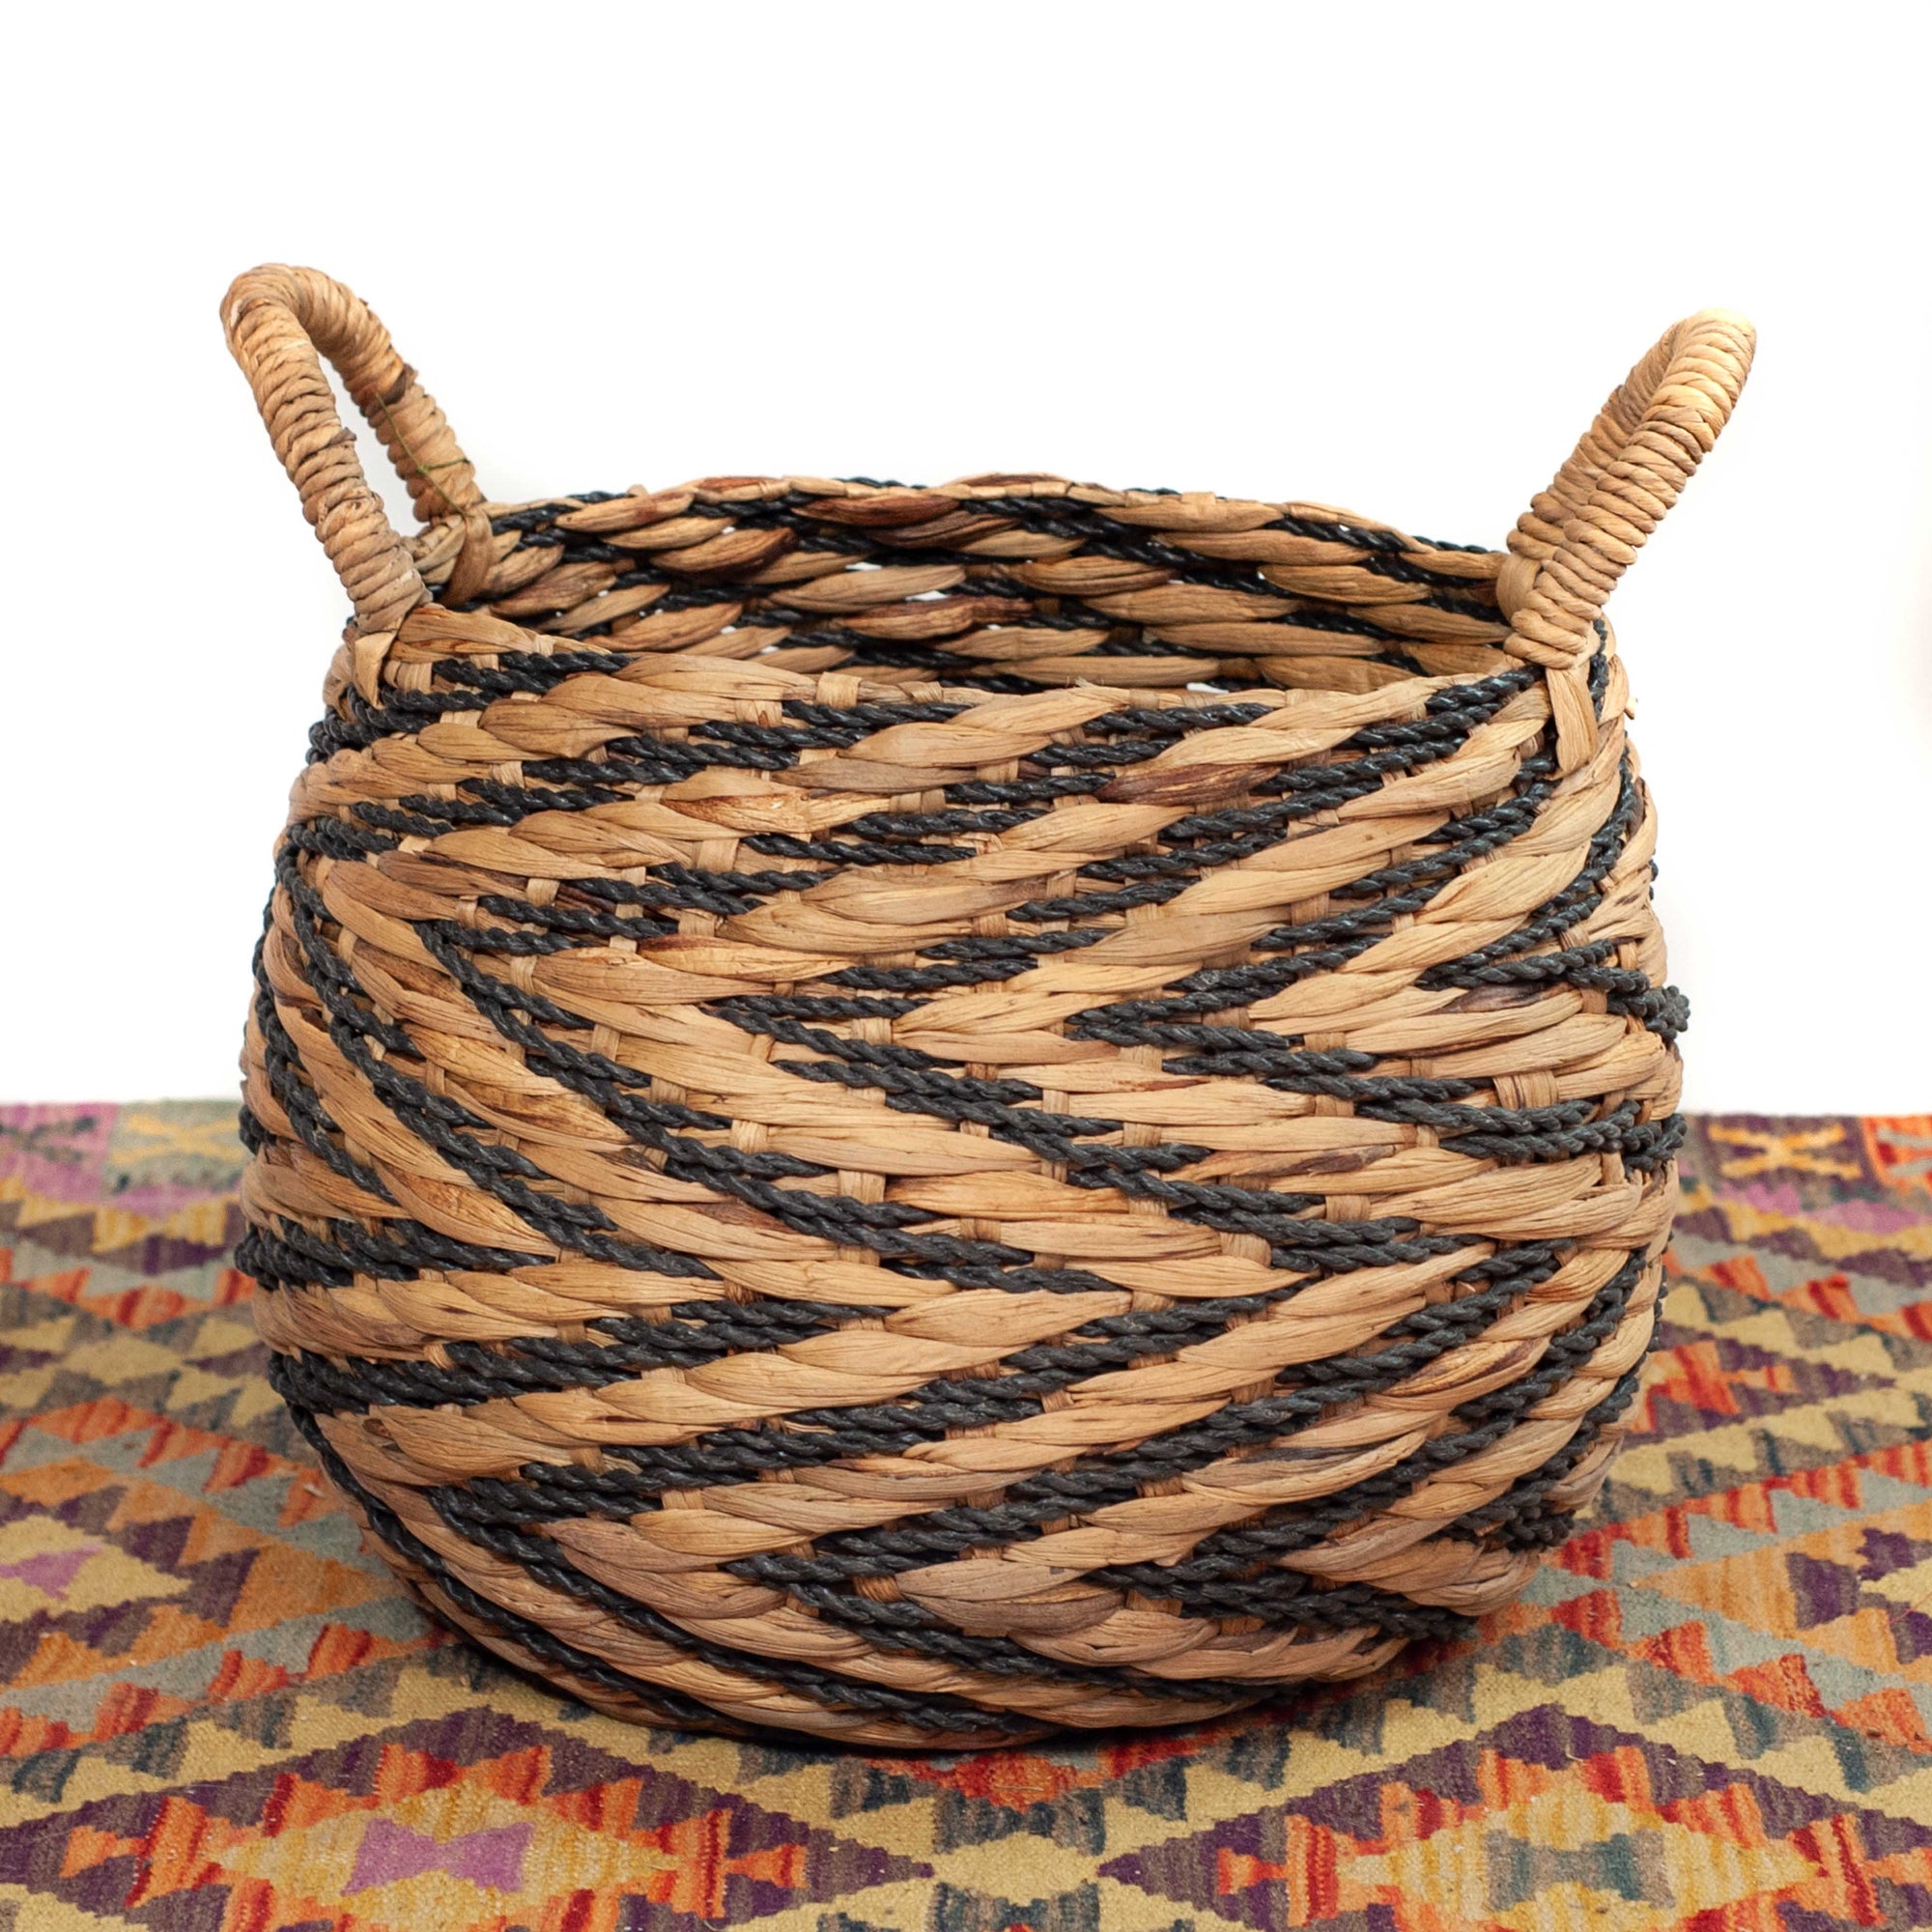 Woven basket made out of water hyacinth planter in natural tone with black accents and handles on neutral background